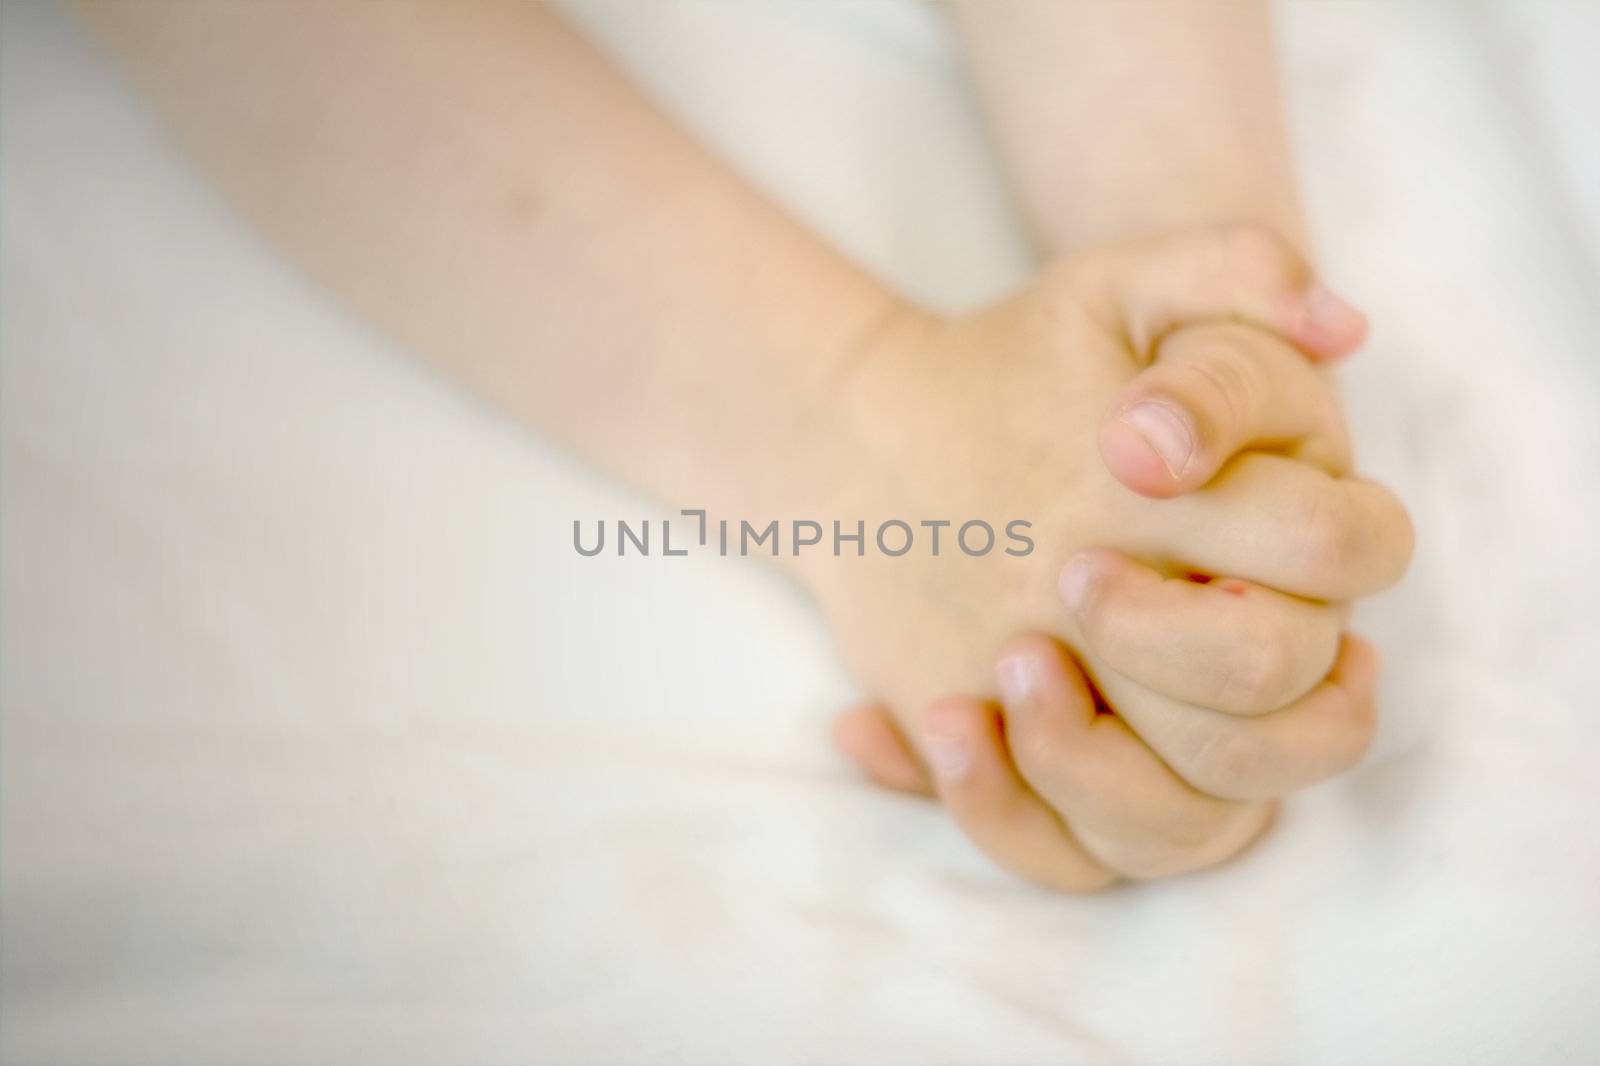 A child's hands folded in prayer on white cloth.